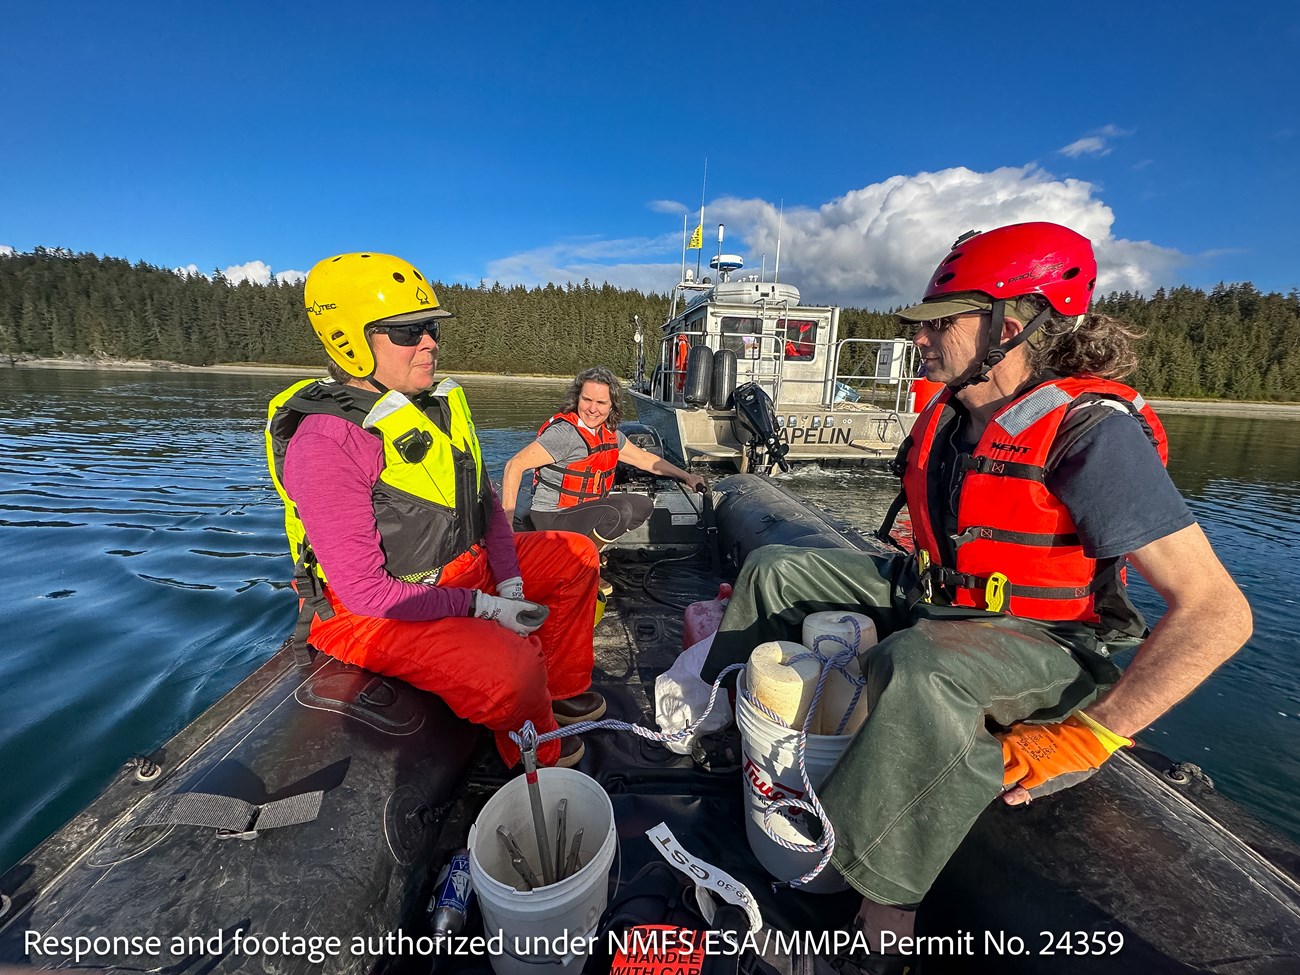 Three boaters wearing safety gear prepare to mobilize on their small vessel, a larger vessel, the Capelin, visible just behind them.